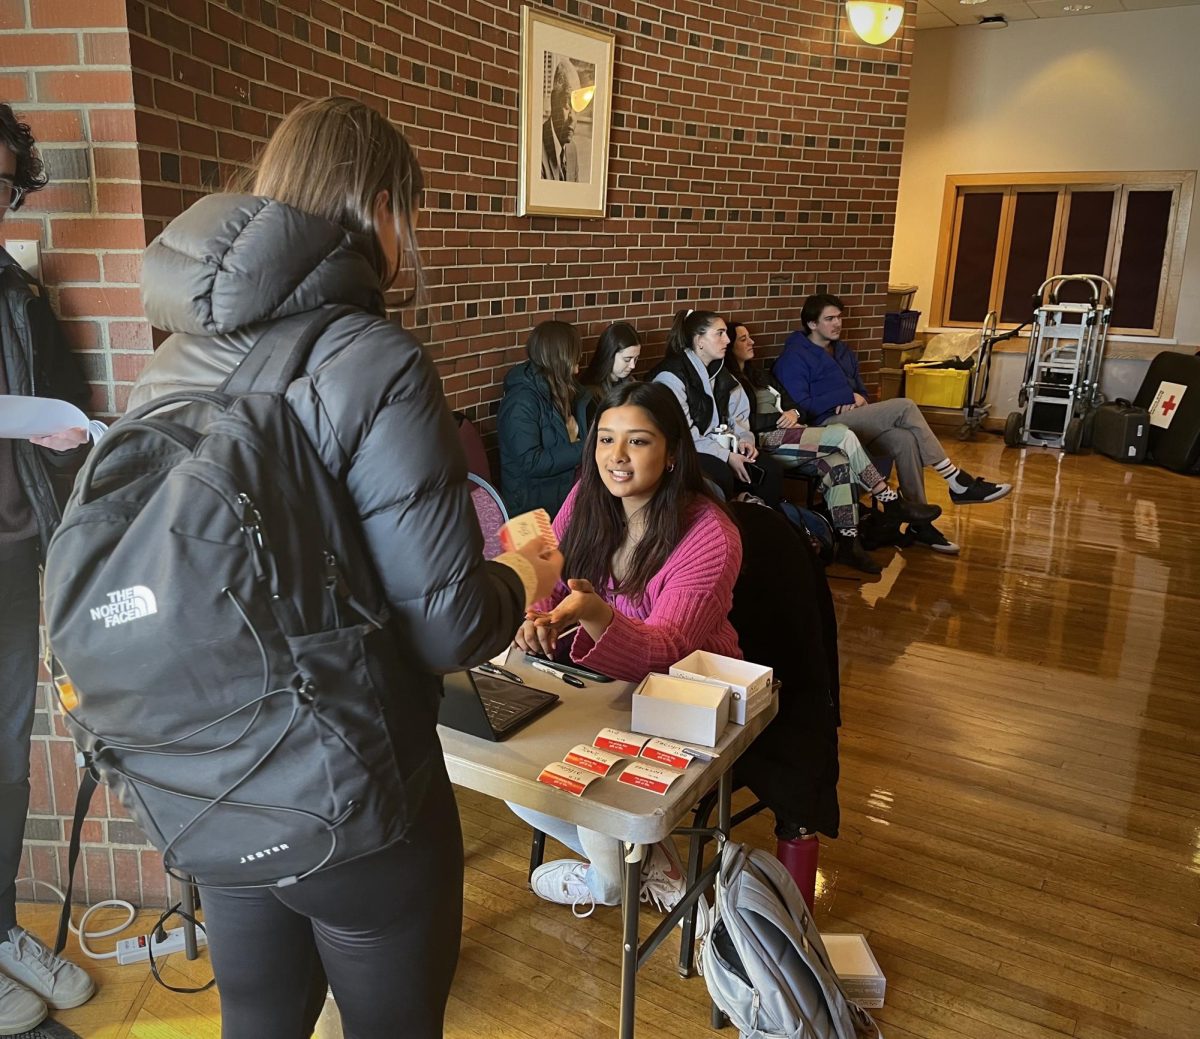 Sivani Arvapalli 26 registers students for the Blood Drive in the Benjamin Mays Center.